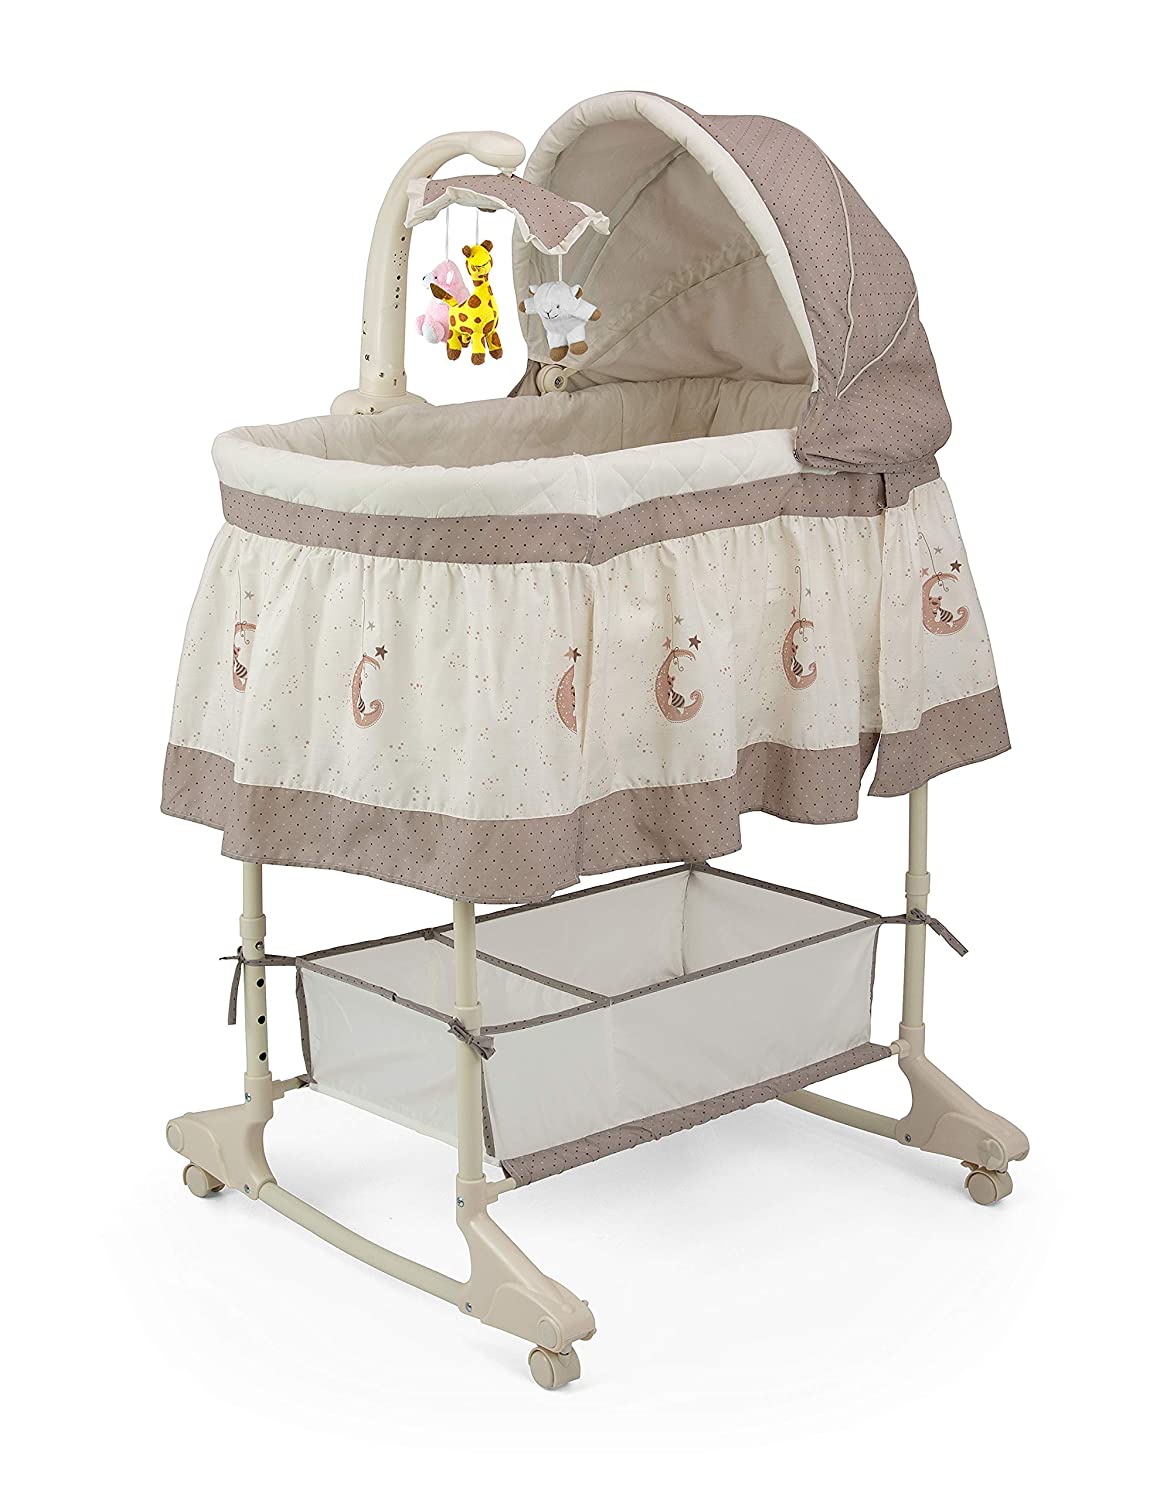 Milly Mally Sweet Melody Moon Cradle with Remote Control Beige